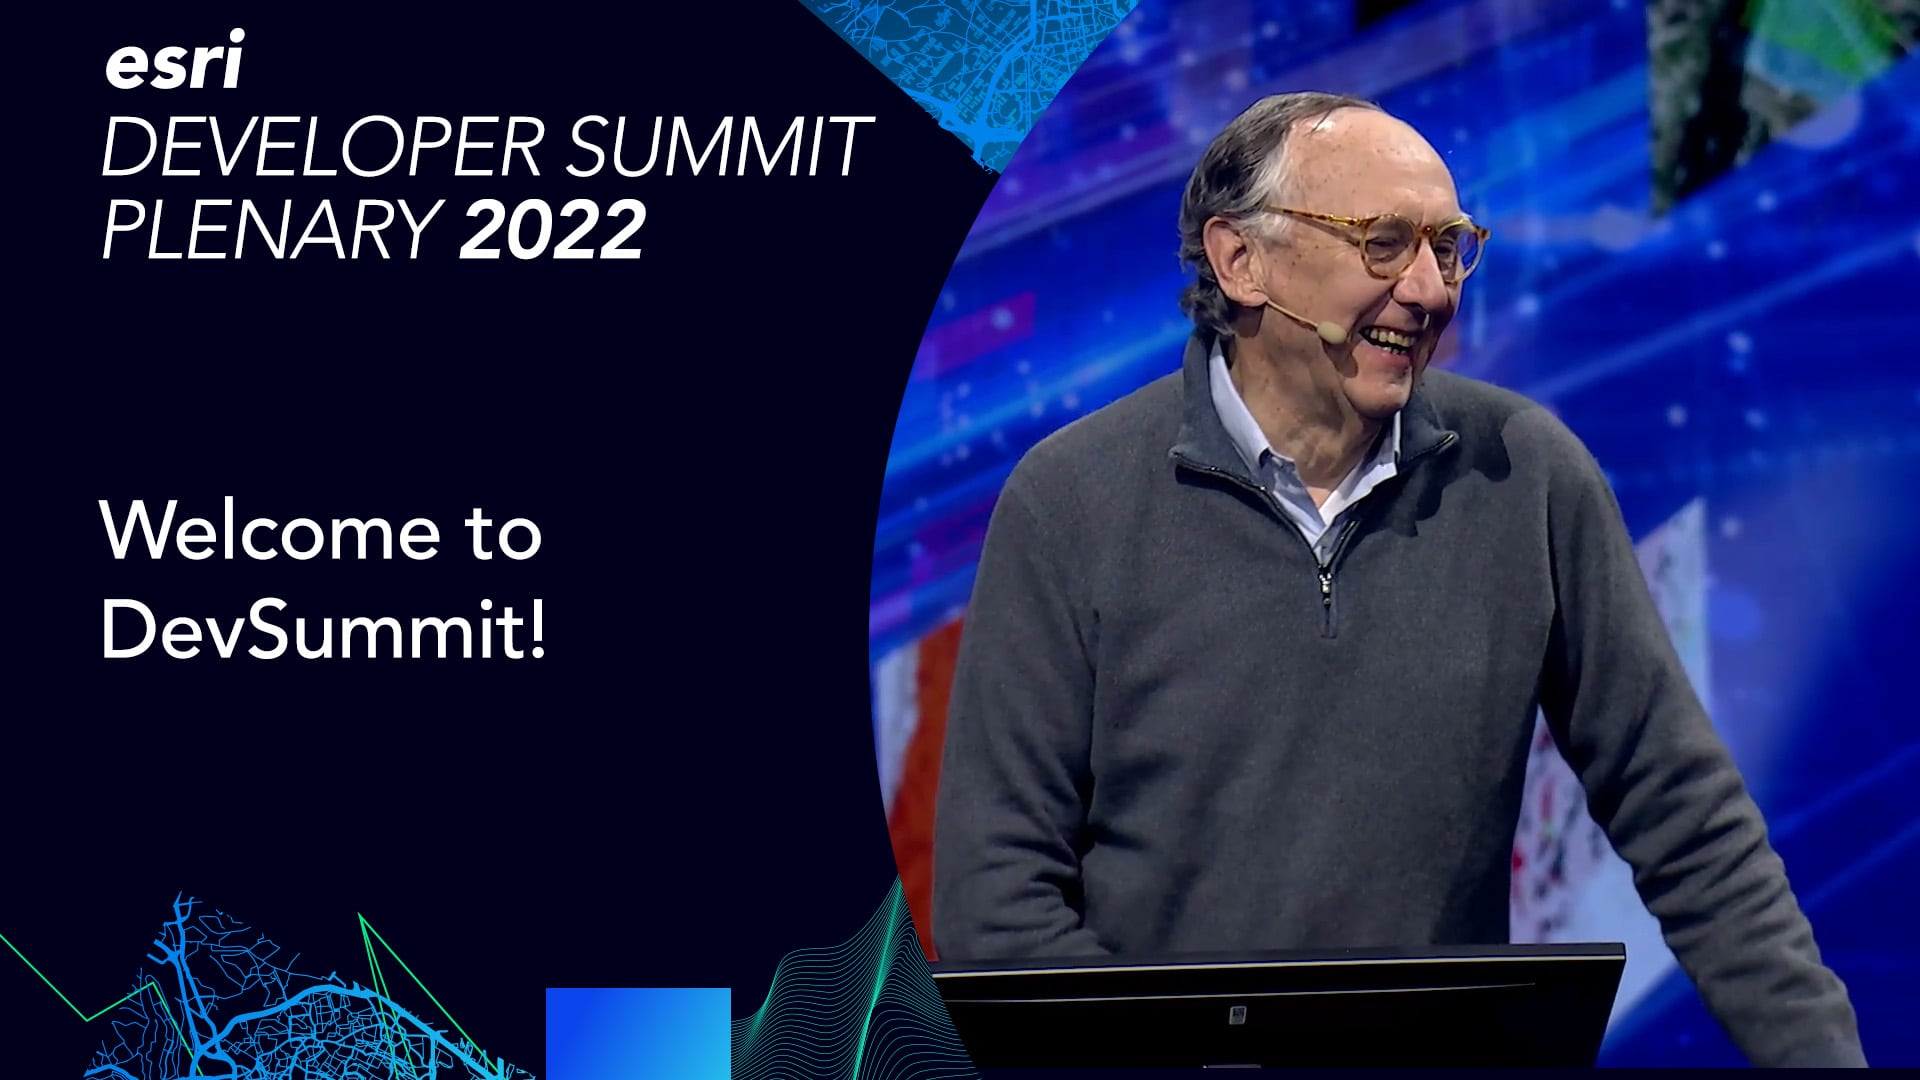 Jack Dangermond smiles while standing at a podium with the words Esri Developer Summit Plenary 2022 and Welcome to DevSummit to the left